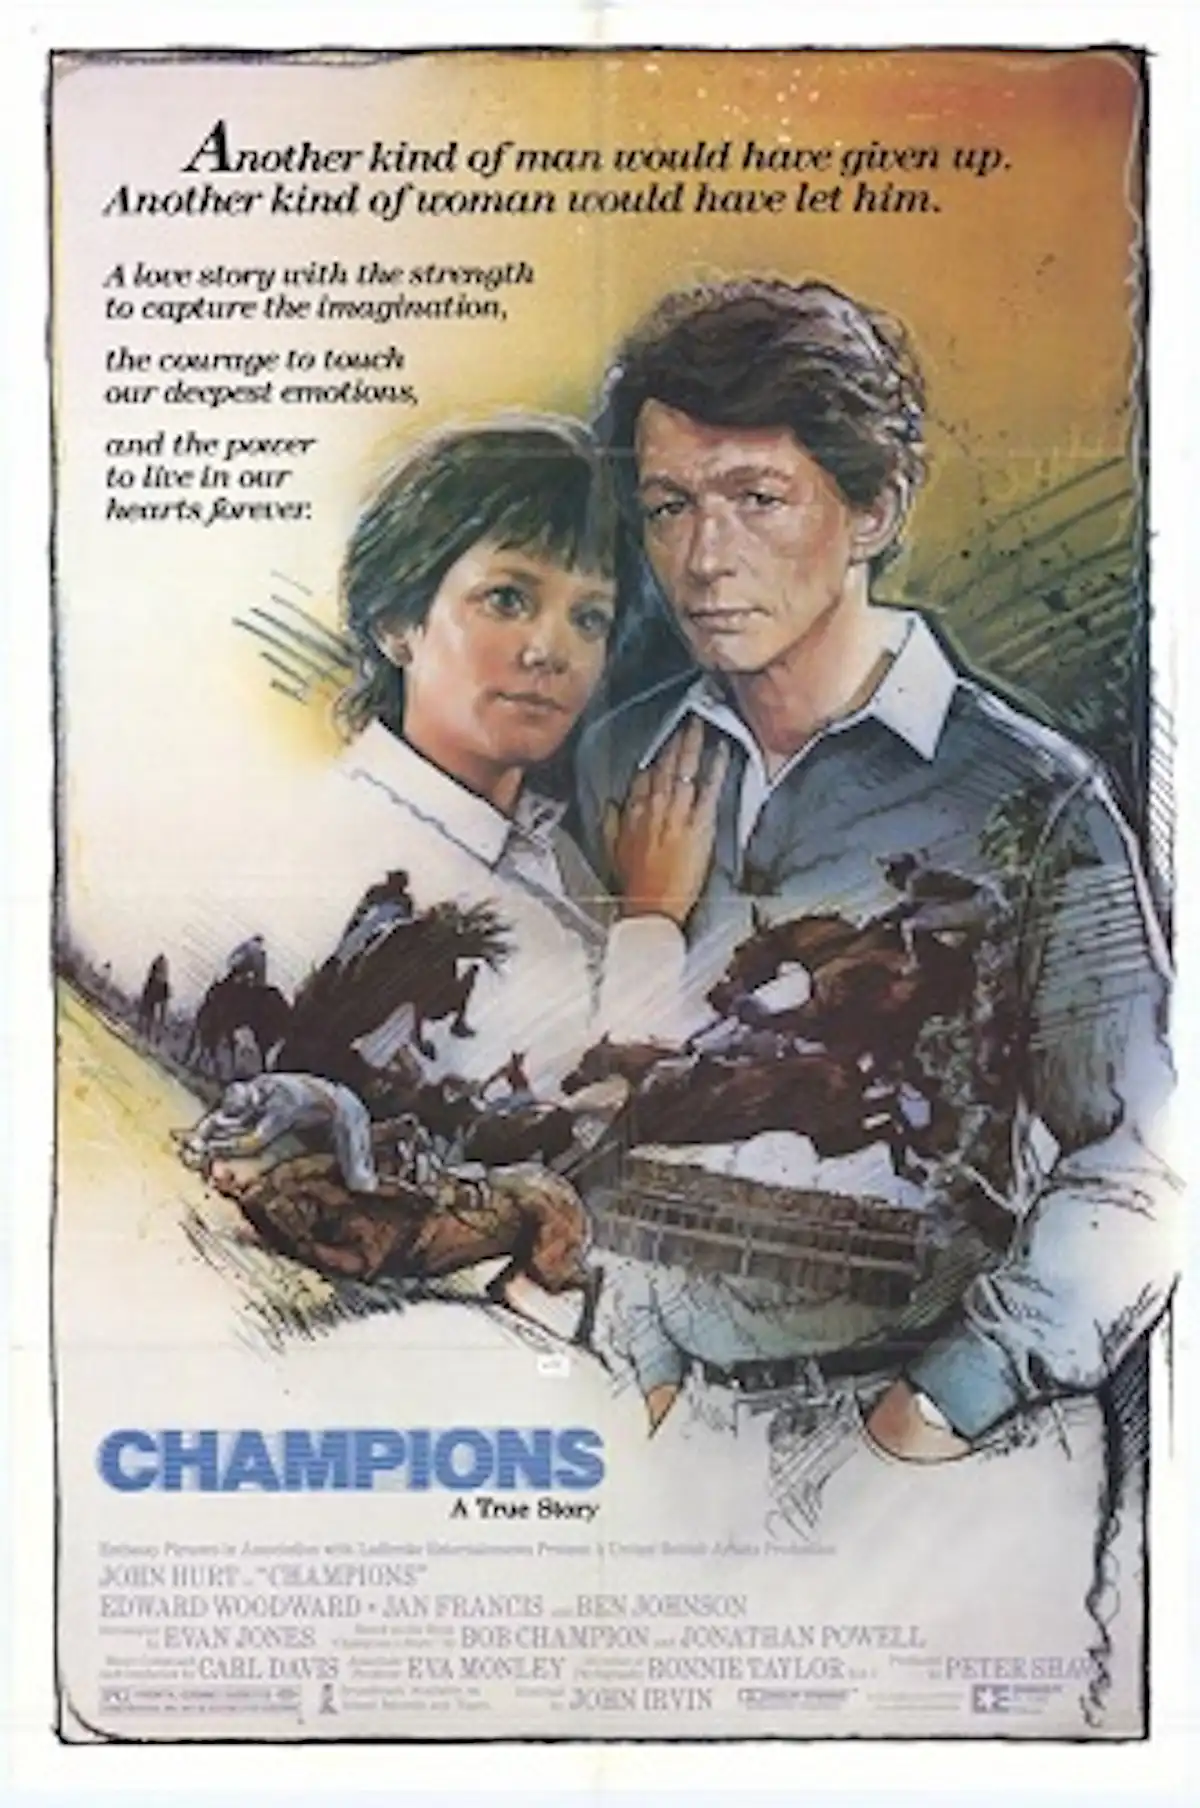 “The Champions” 1984 movie poster . Source: The Conversation 